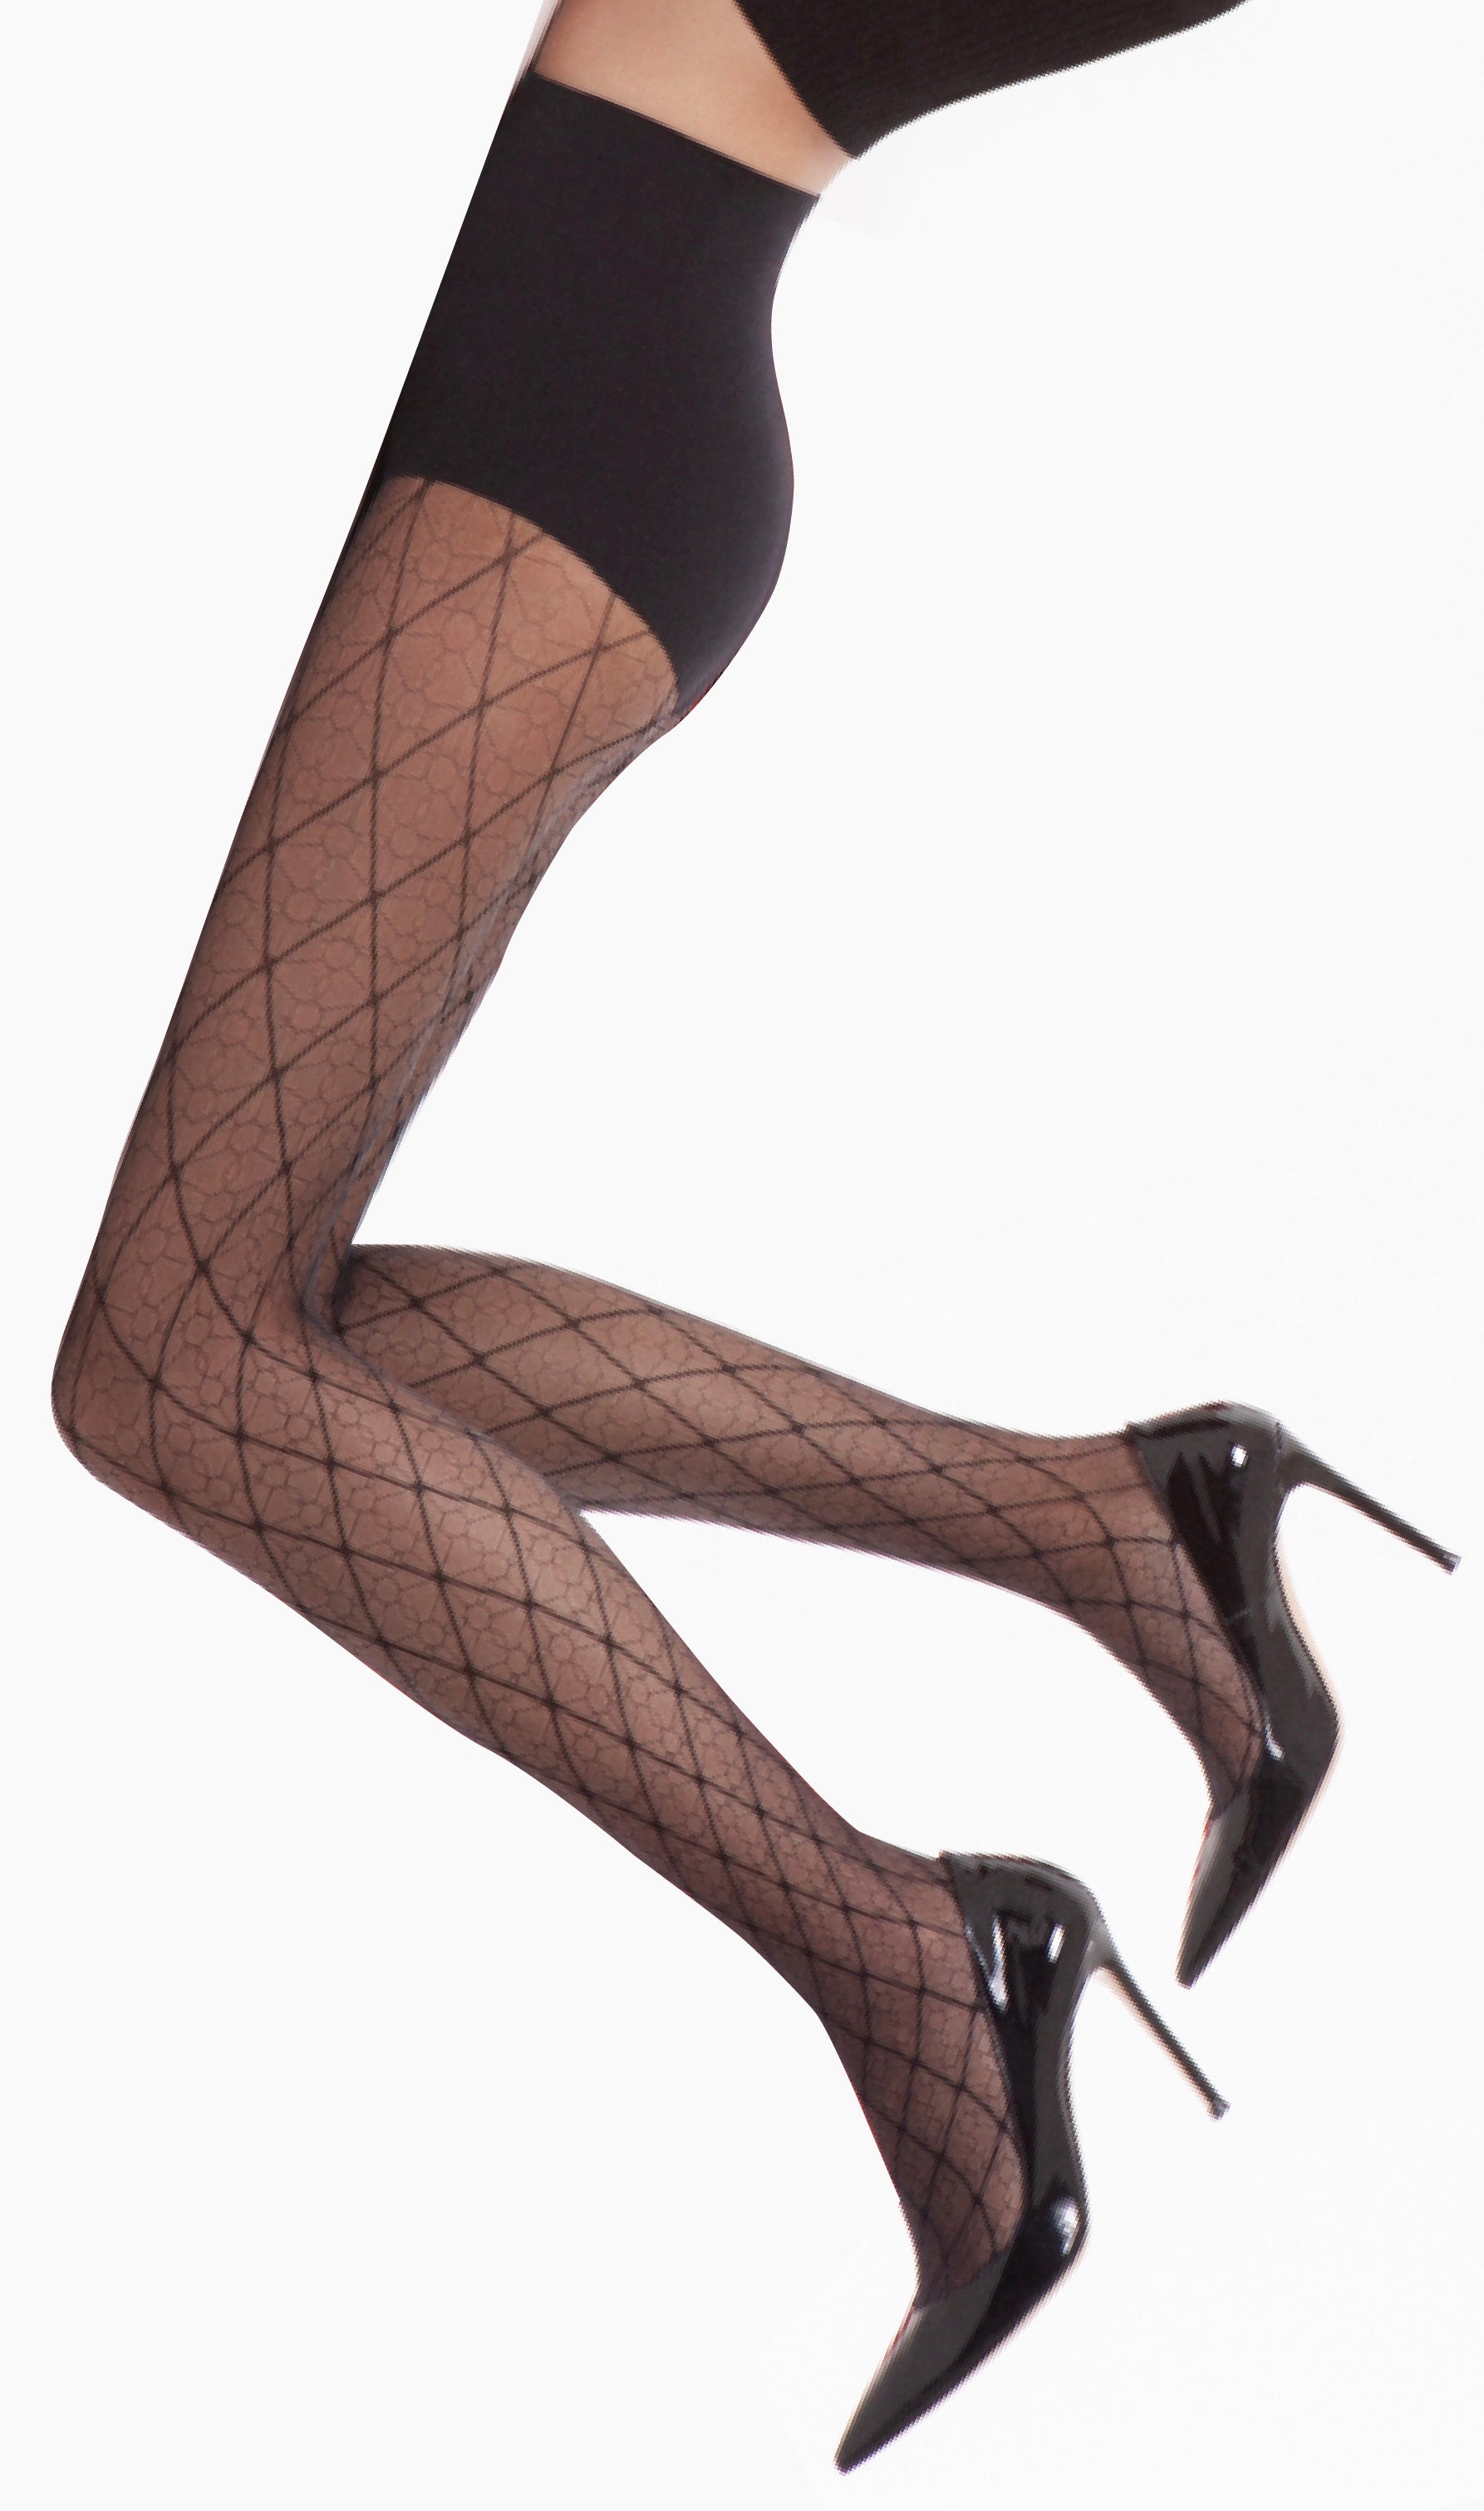 Omsa 3563 Rombi Collant - Sheer seamless fashion tights with a black diamond style pattern, an alternative to the iconic Gucci pattern. Available in black and nude/black